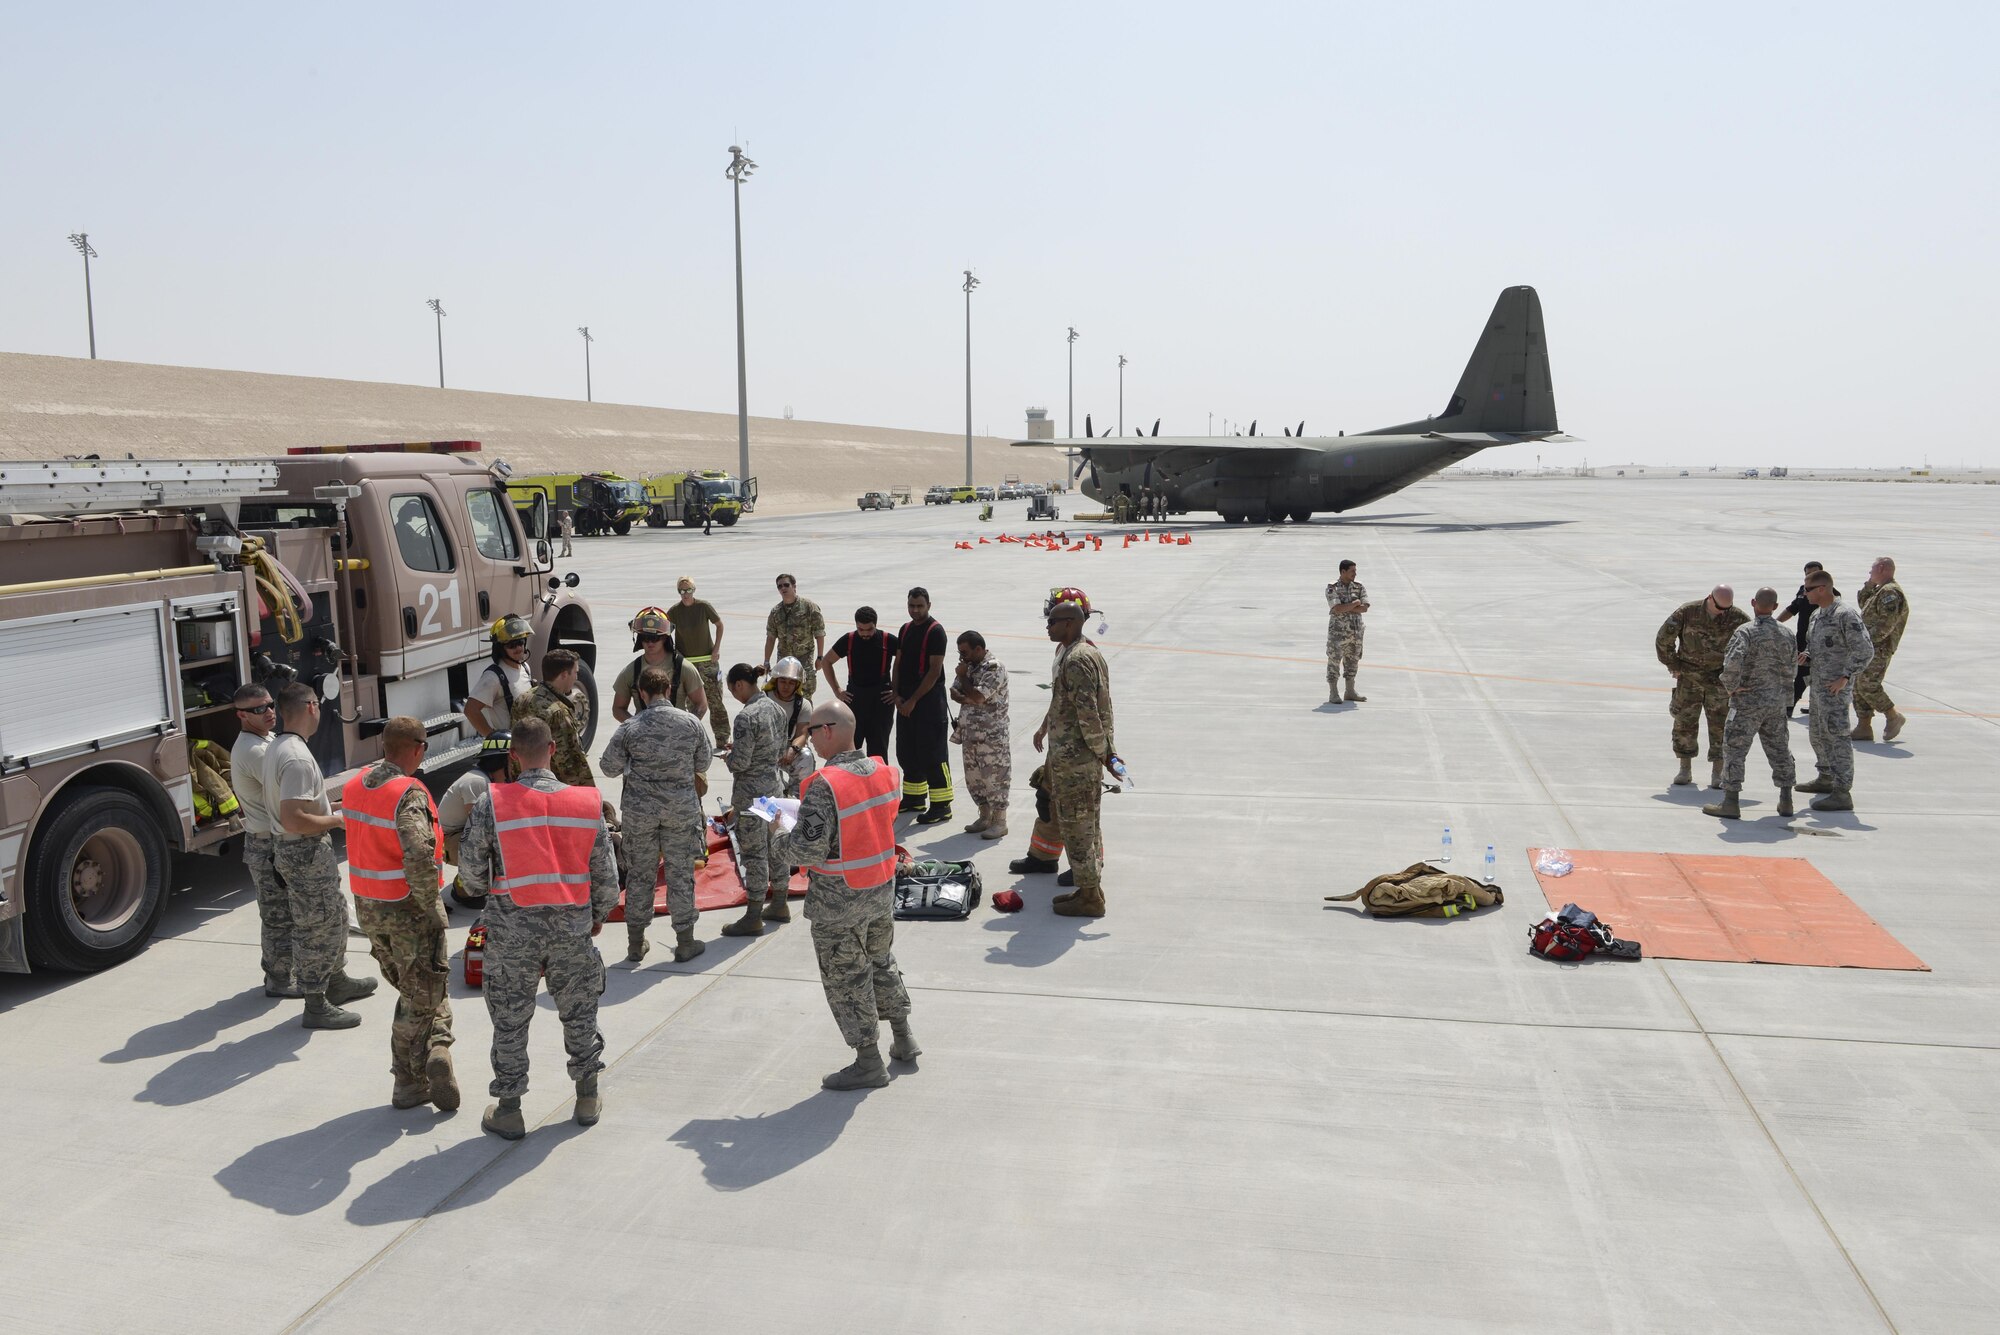 Members of the U.S. Air Force, Royal Air Force, and Qatar Emiri Air Force take part in responding too, and evaluating the response too, a simulated aircraft accident on the runway at Al Udeid Air Base, Qatar, Oct. 3, 2017.